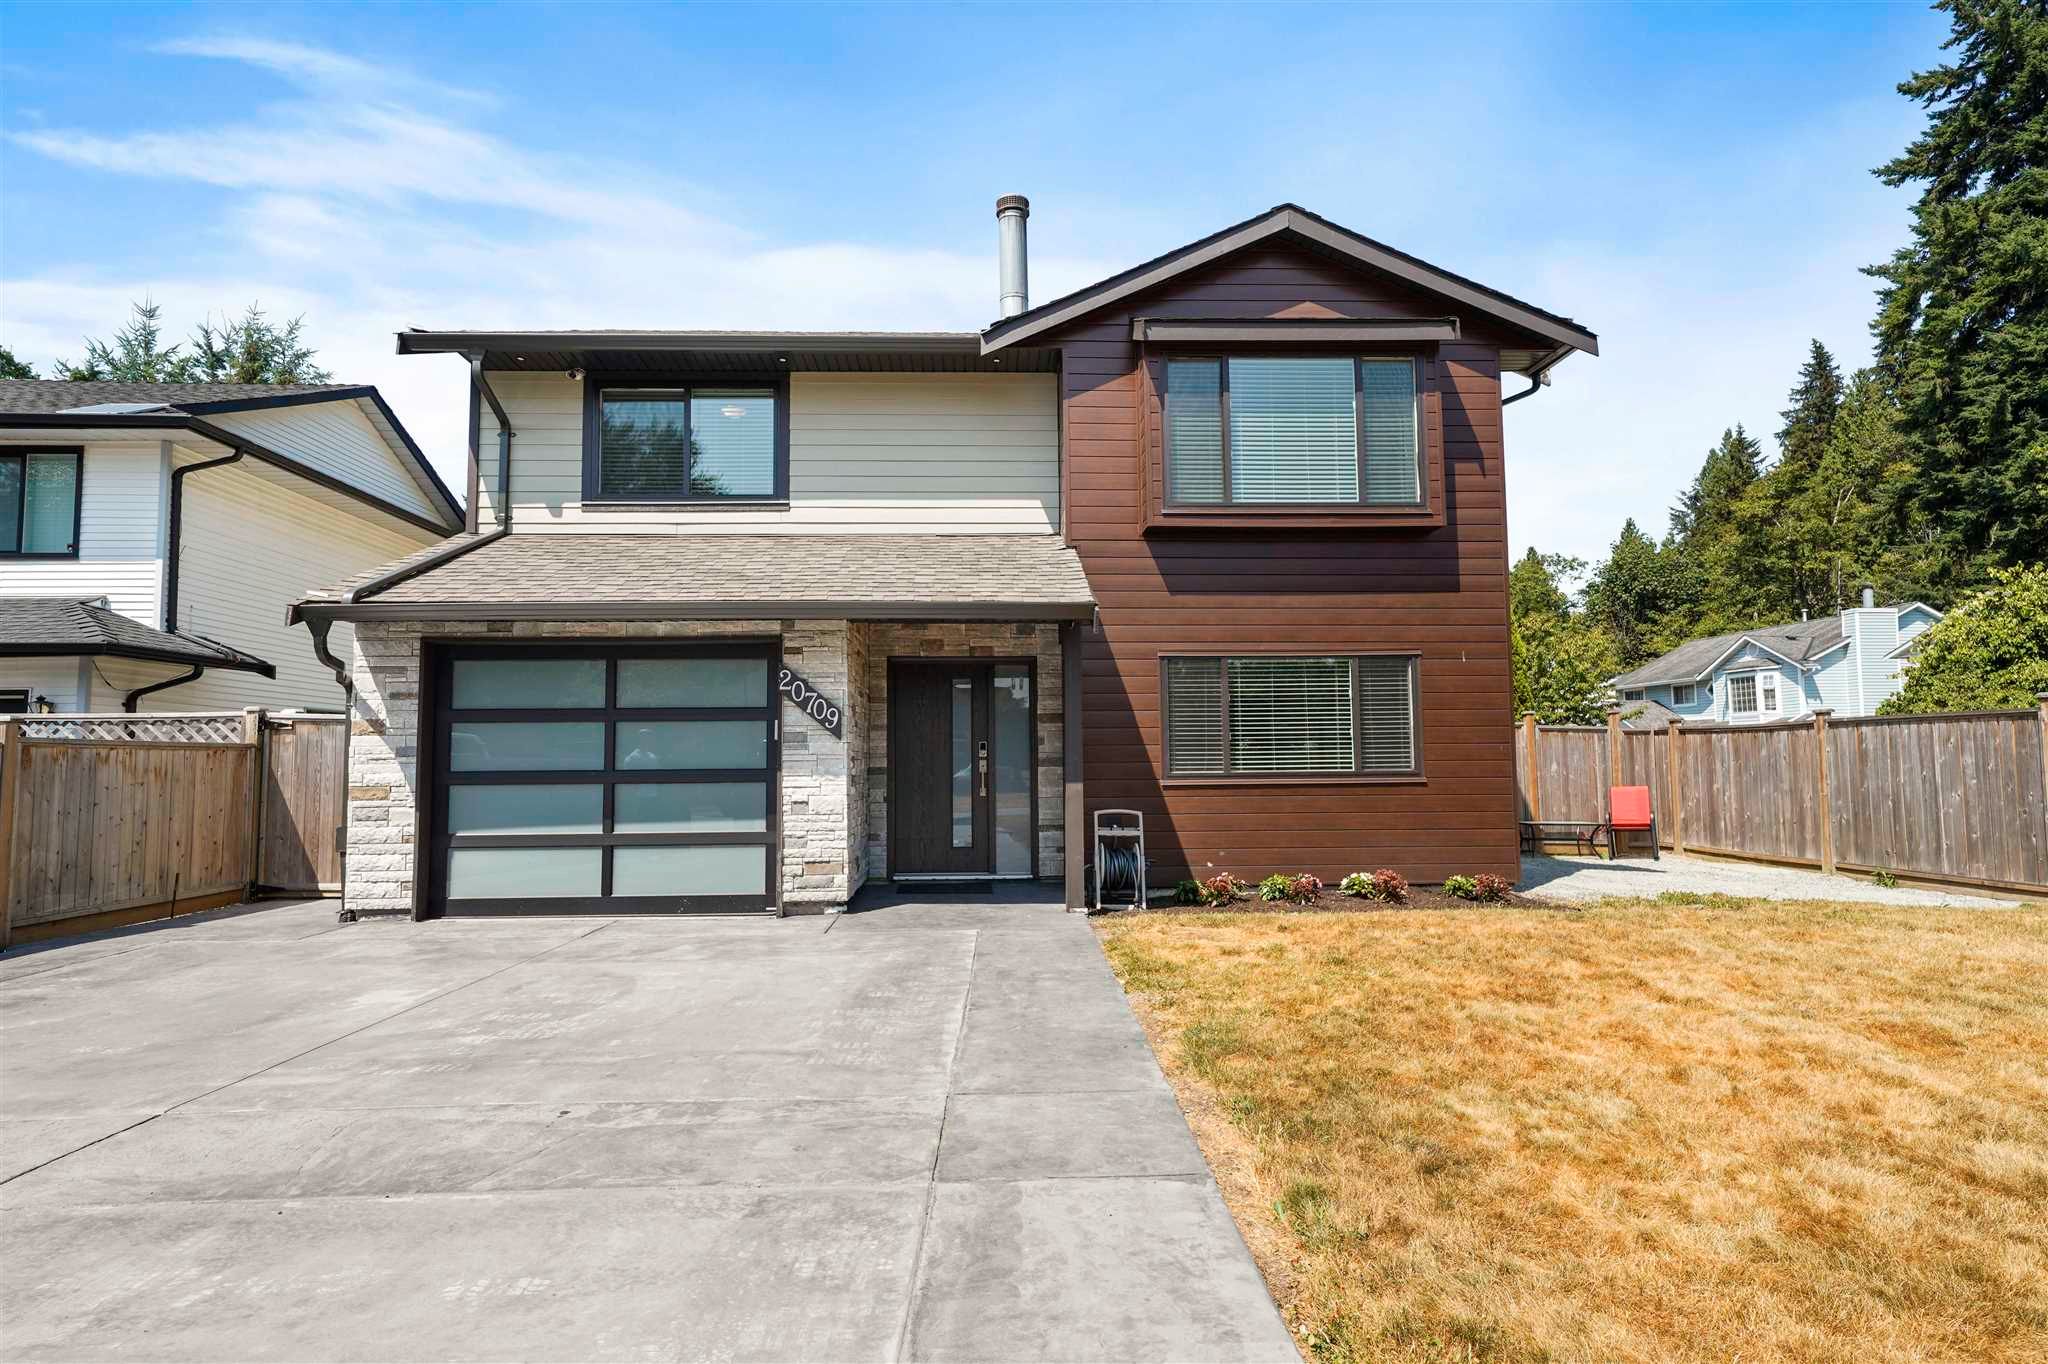 I have sold a property at 20709 120B AVE in Maple Ridge
